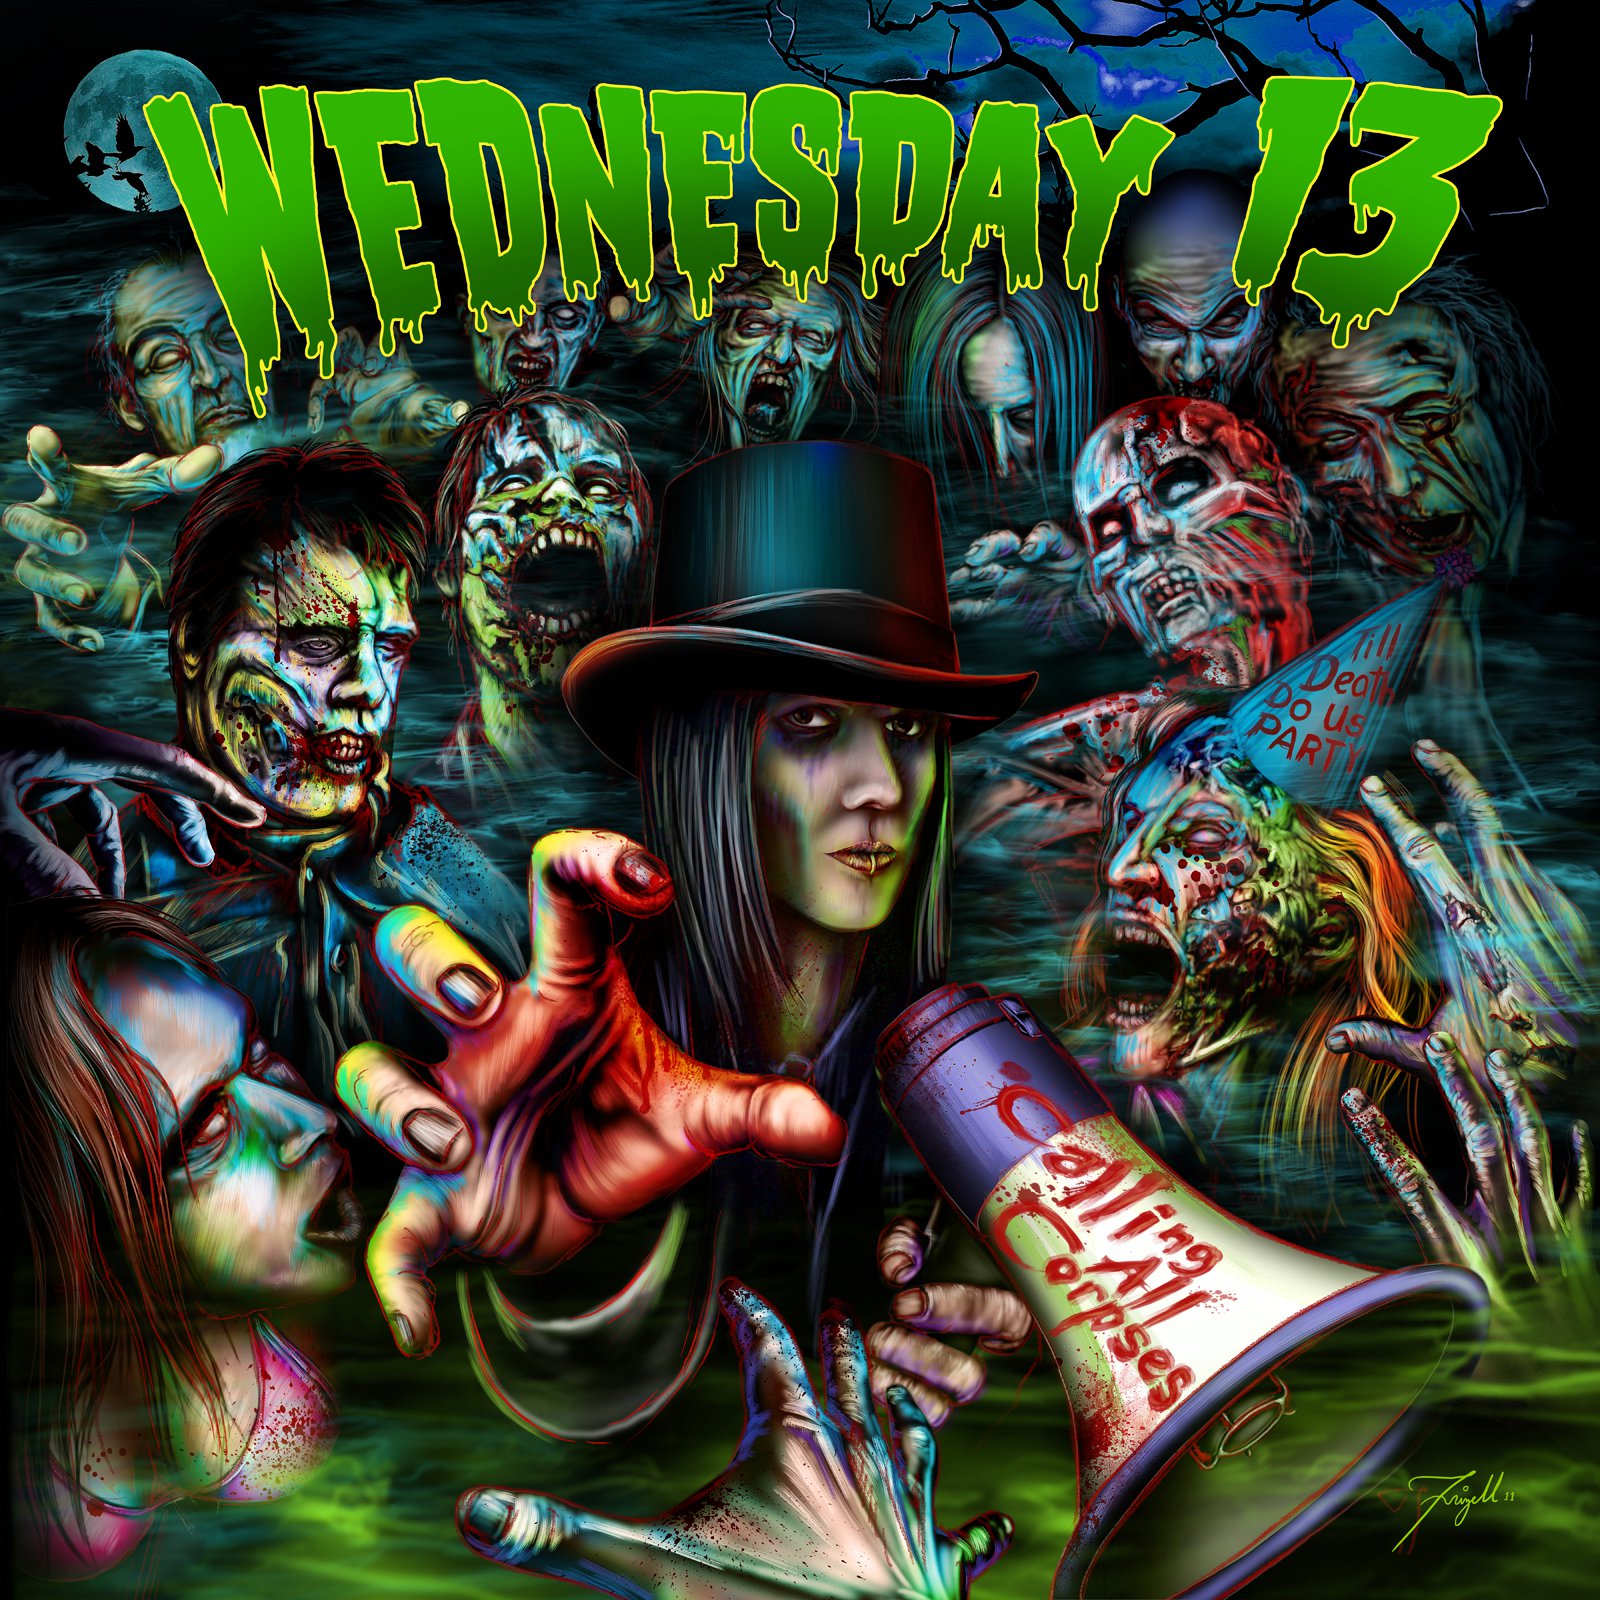 Wednesday 13 – Calling All Corpses, Soundwave 2012